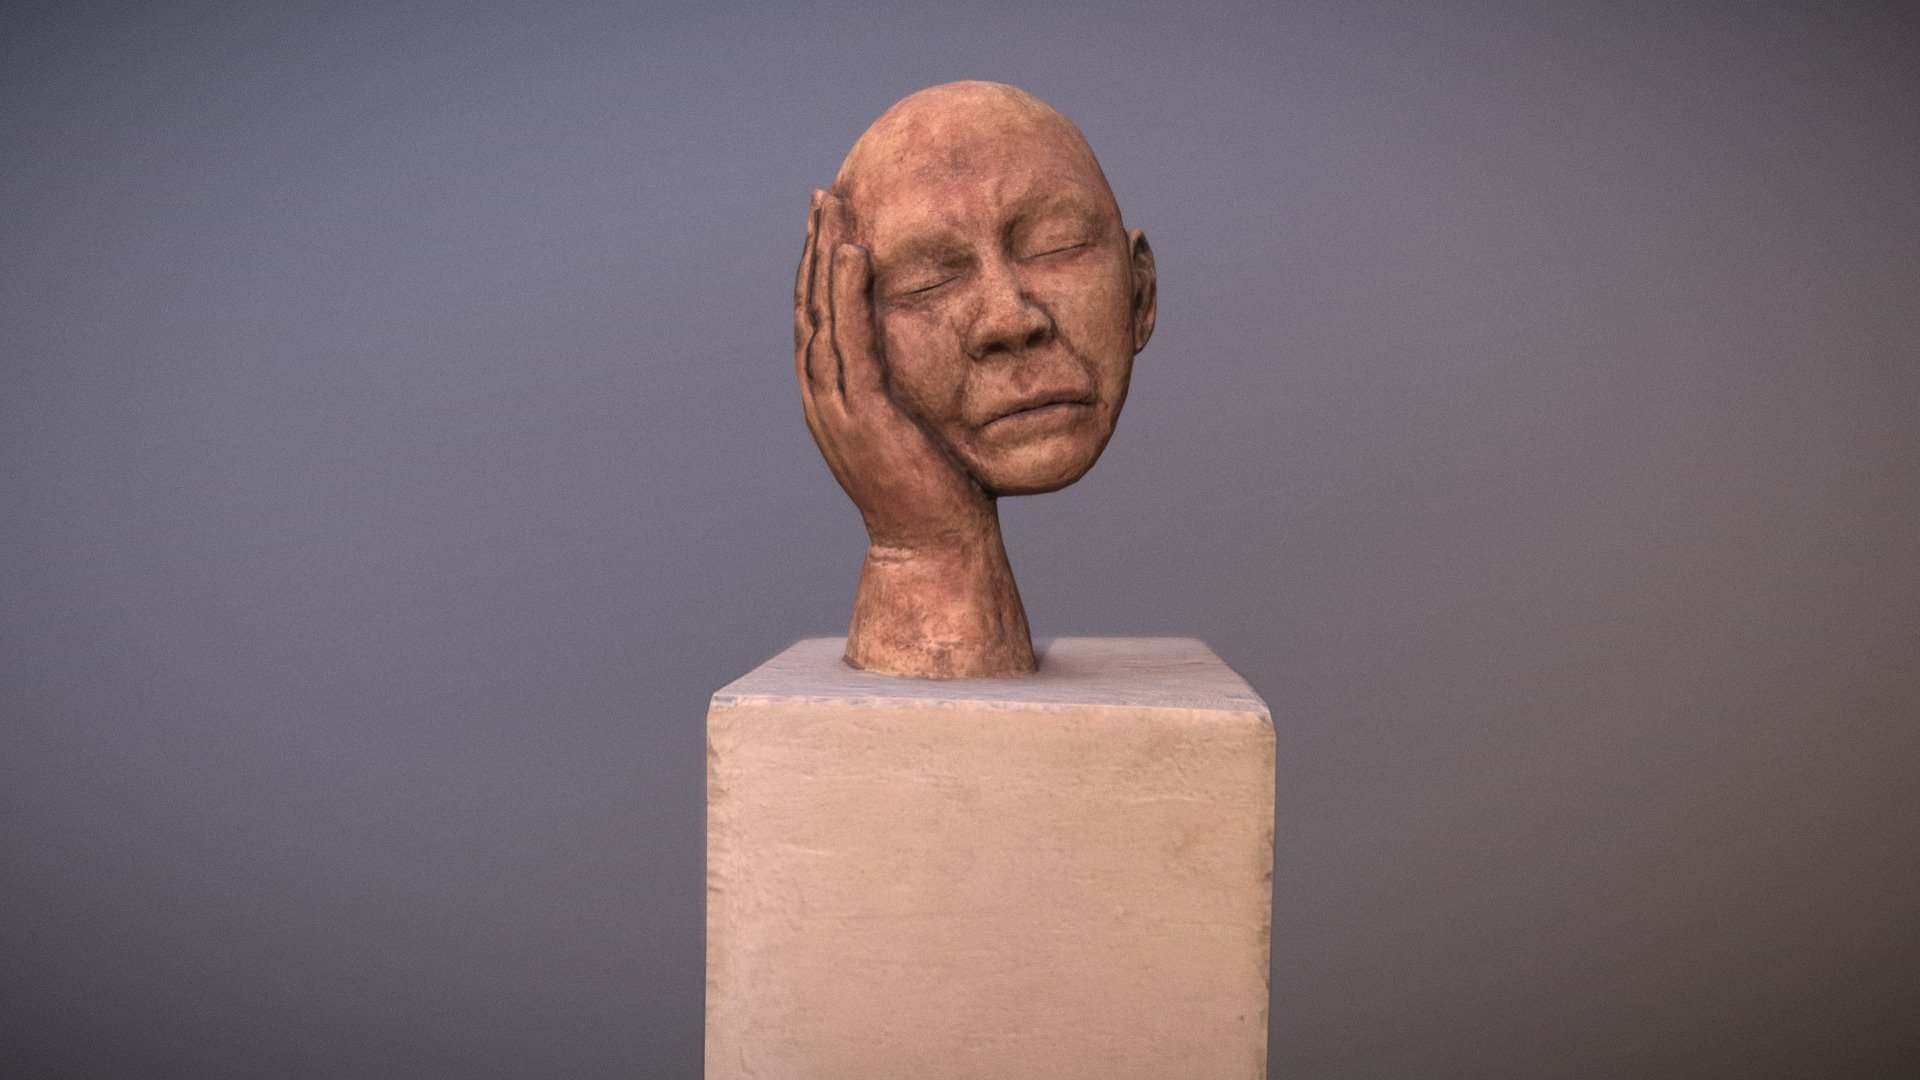 Clay sculpture wakes up